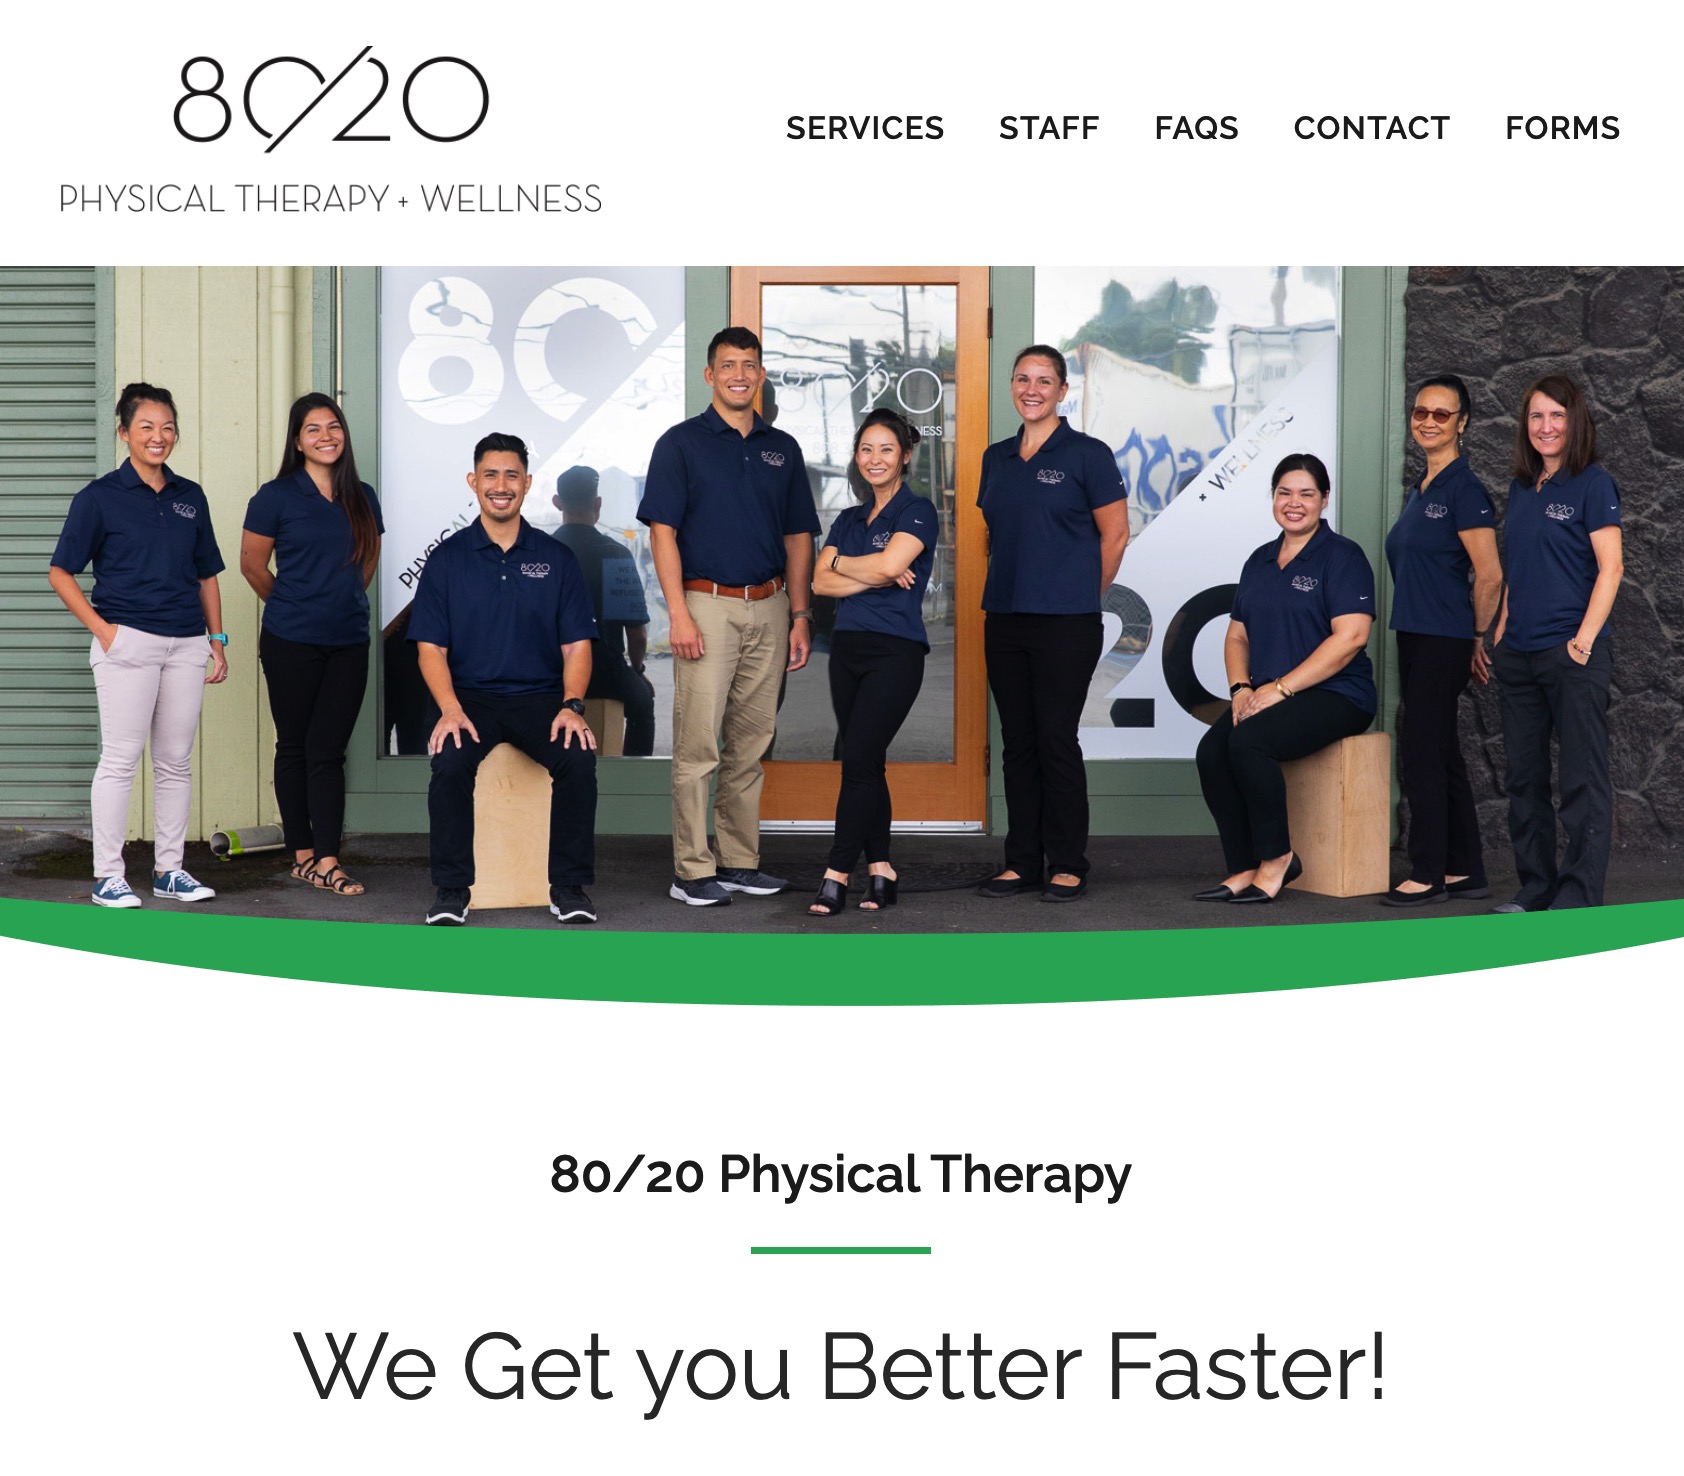 80/20 Physical Therapy